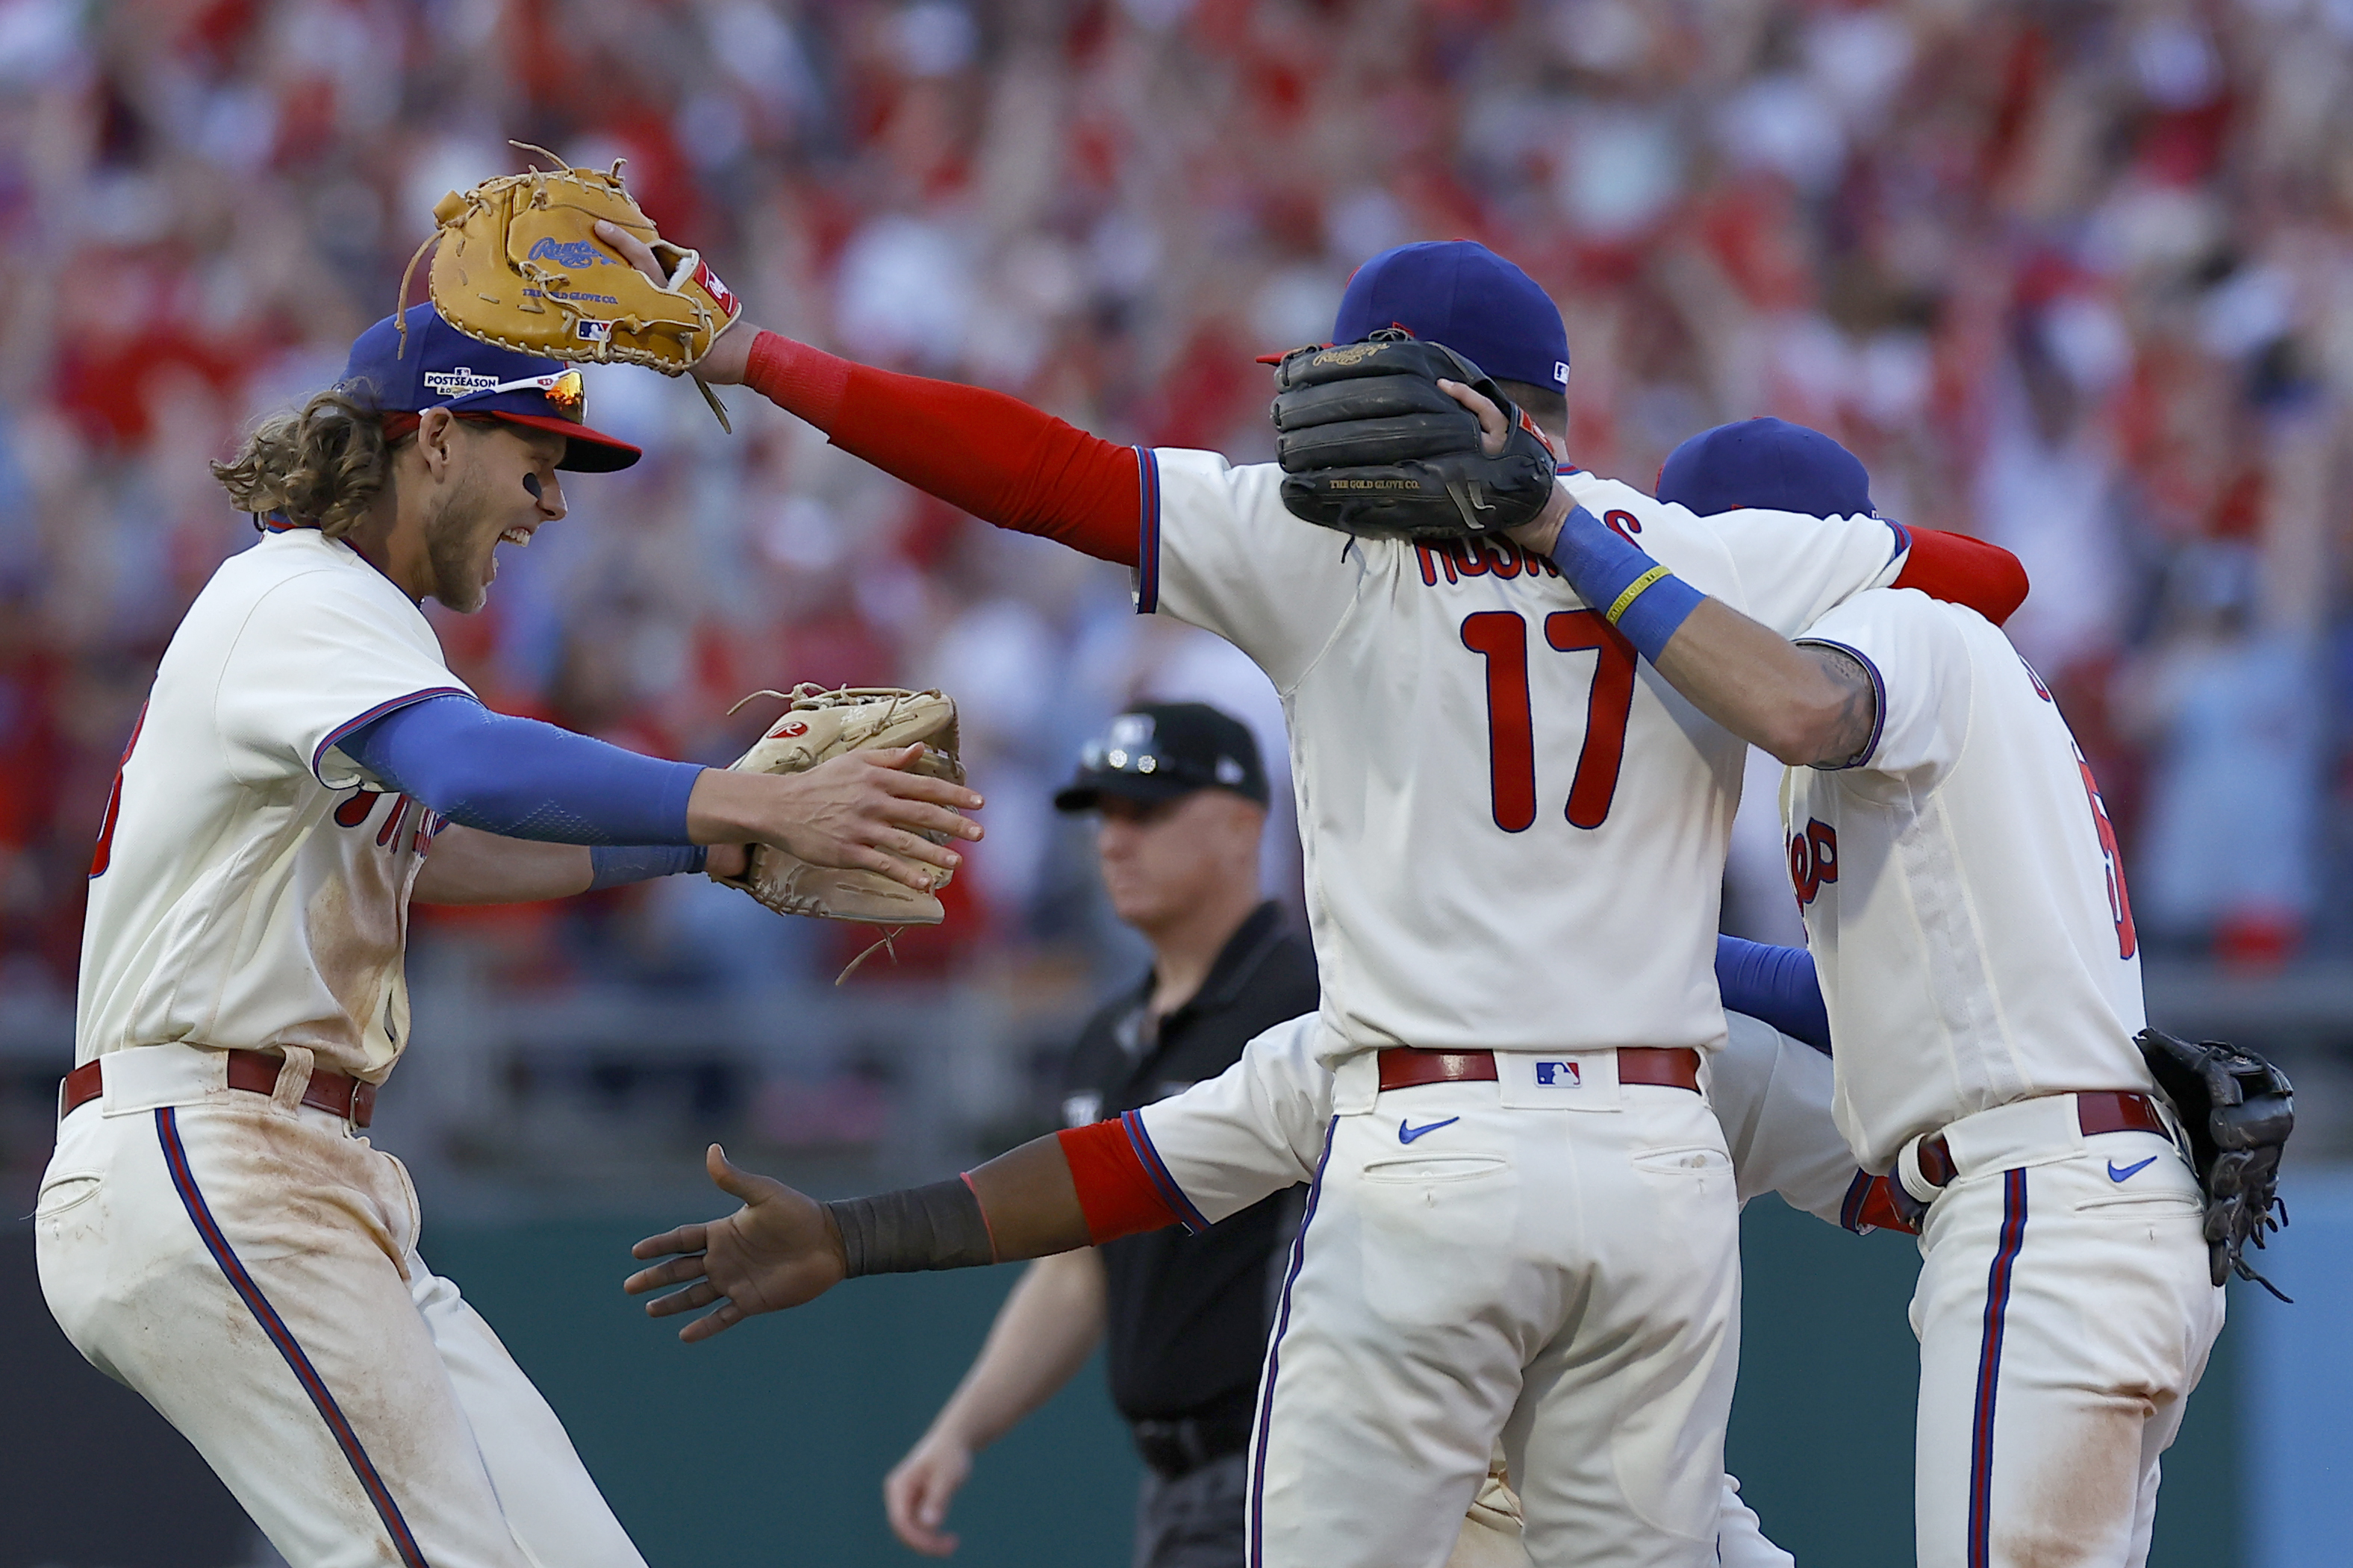 Phillies beat Braves 3-1 and advance to NLCS for 2nd straight season